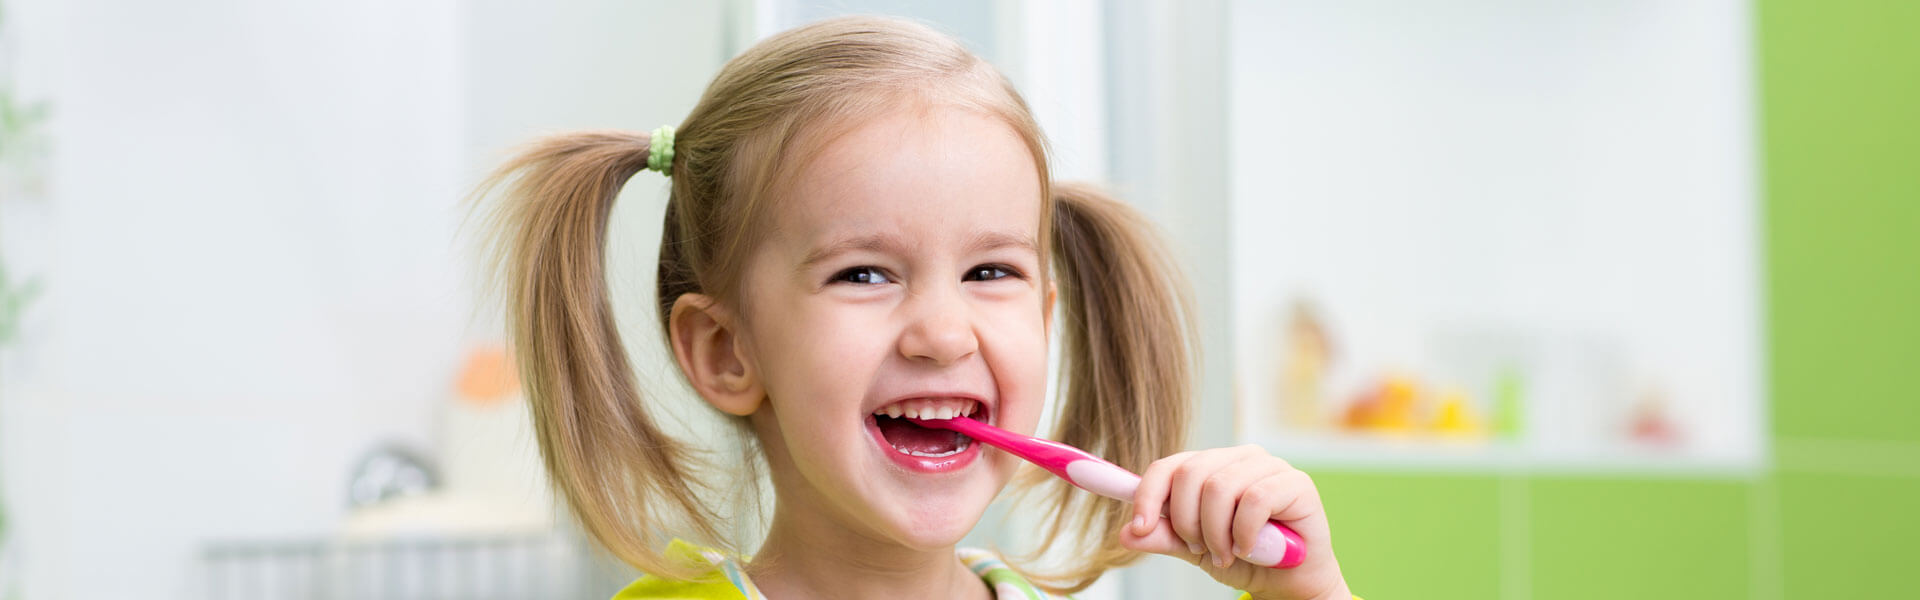 When Should My Child First See a Dentist?